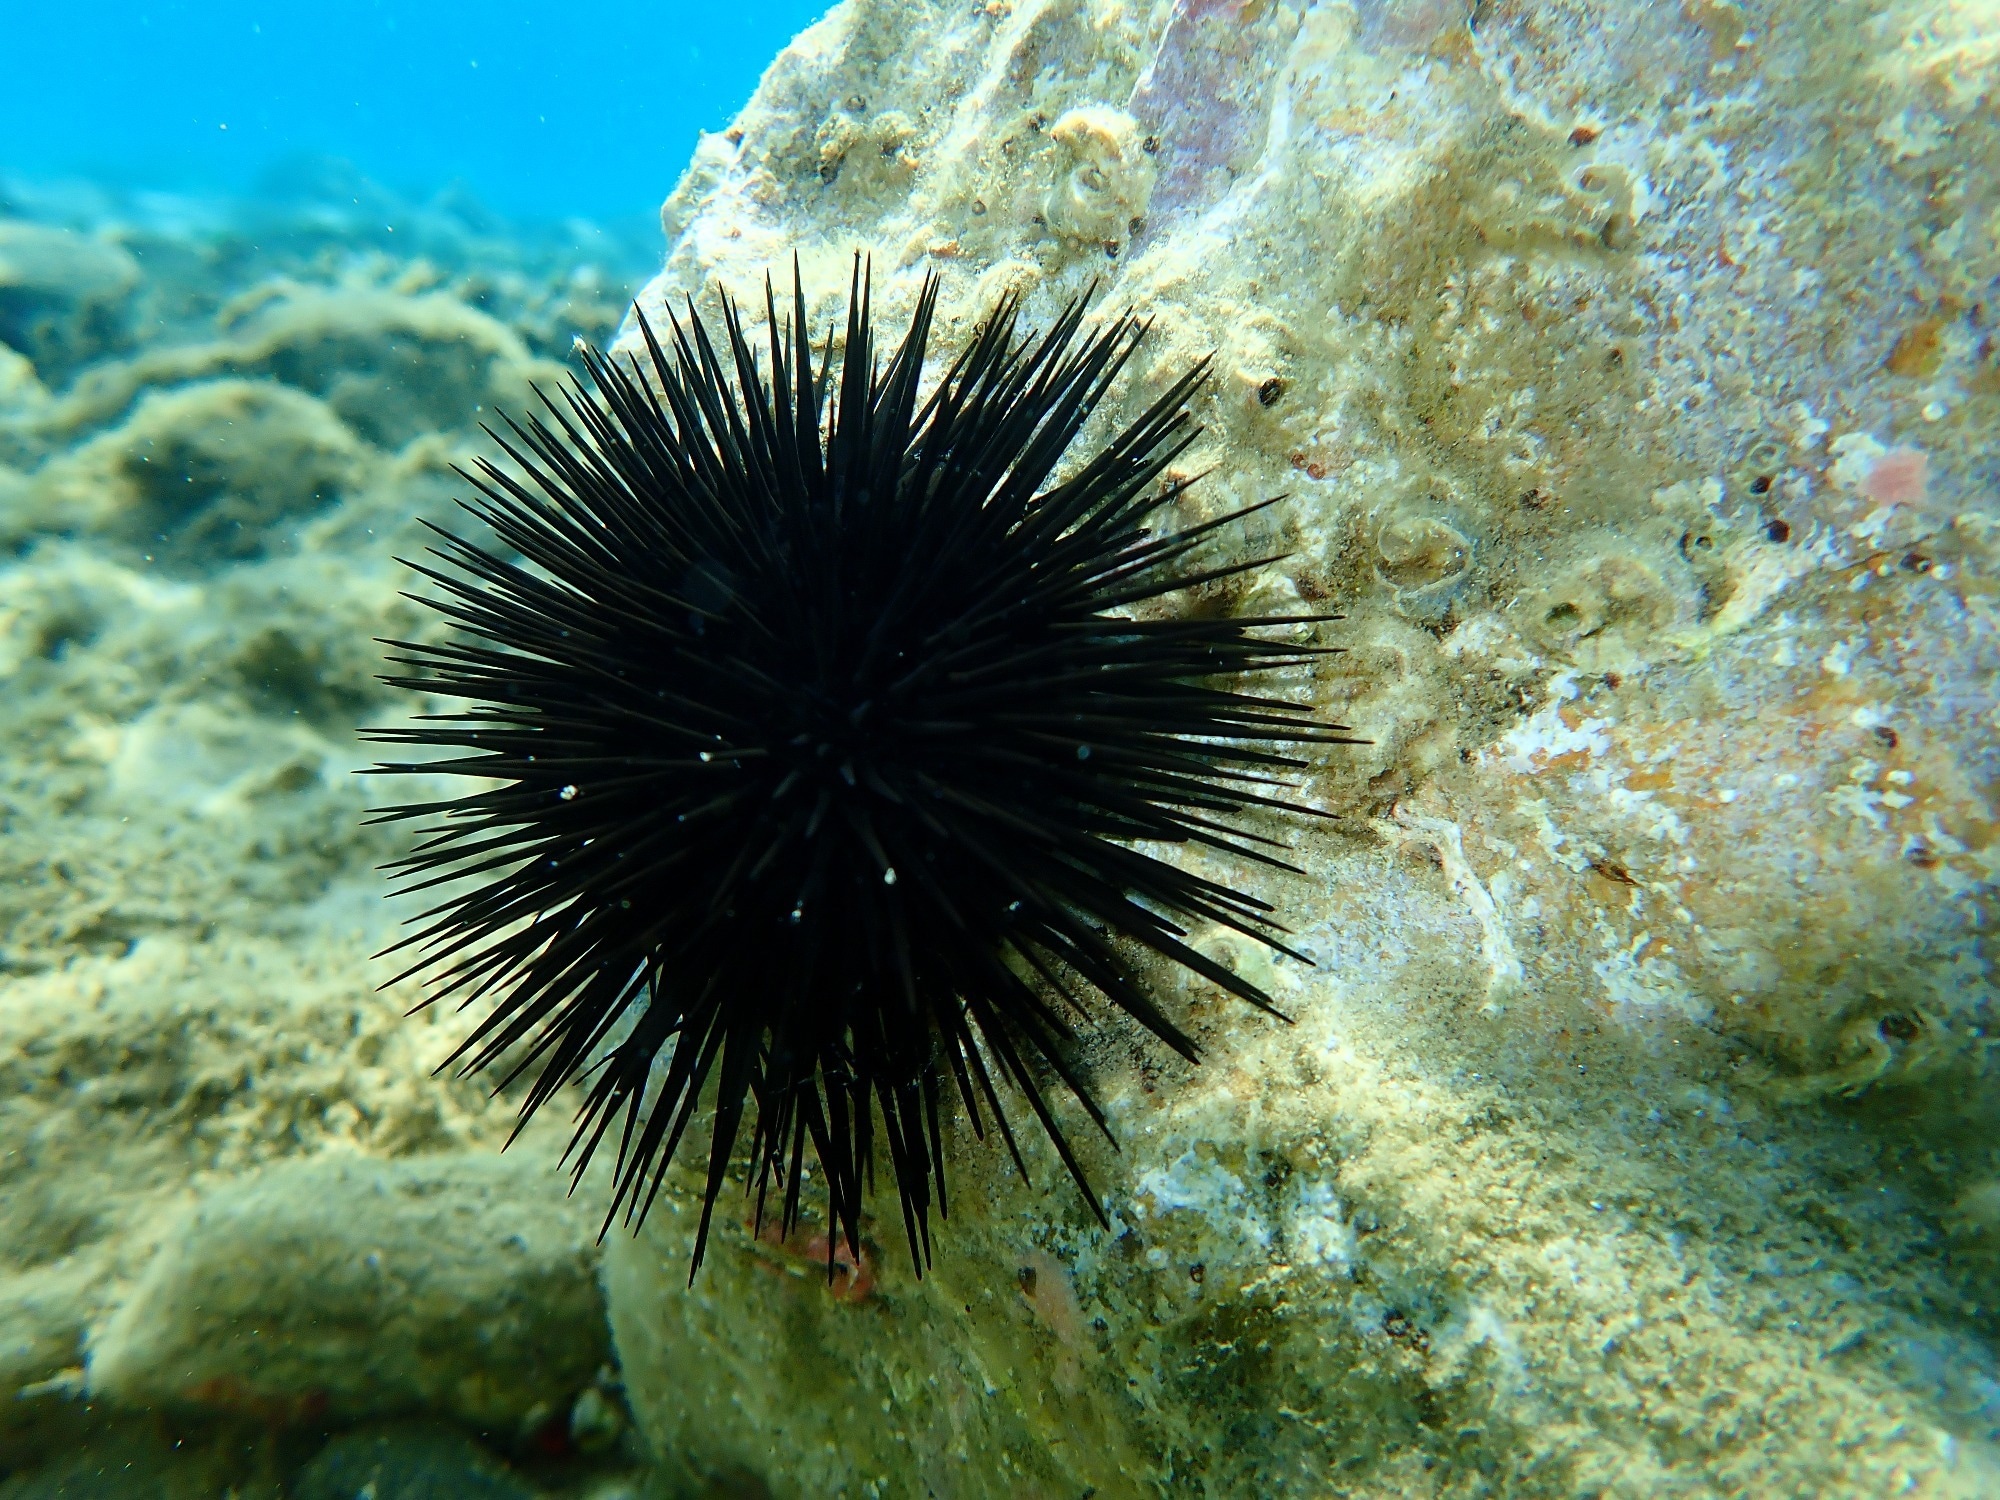 Study: In Vitro Anti-Inflammatory and Vasculoprotective Effects of Red Cell Extract from the Black Sea Urchin Arbacia lixula. Image Credit: Alexey Masliy / Shutterstock